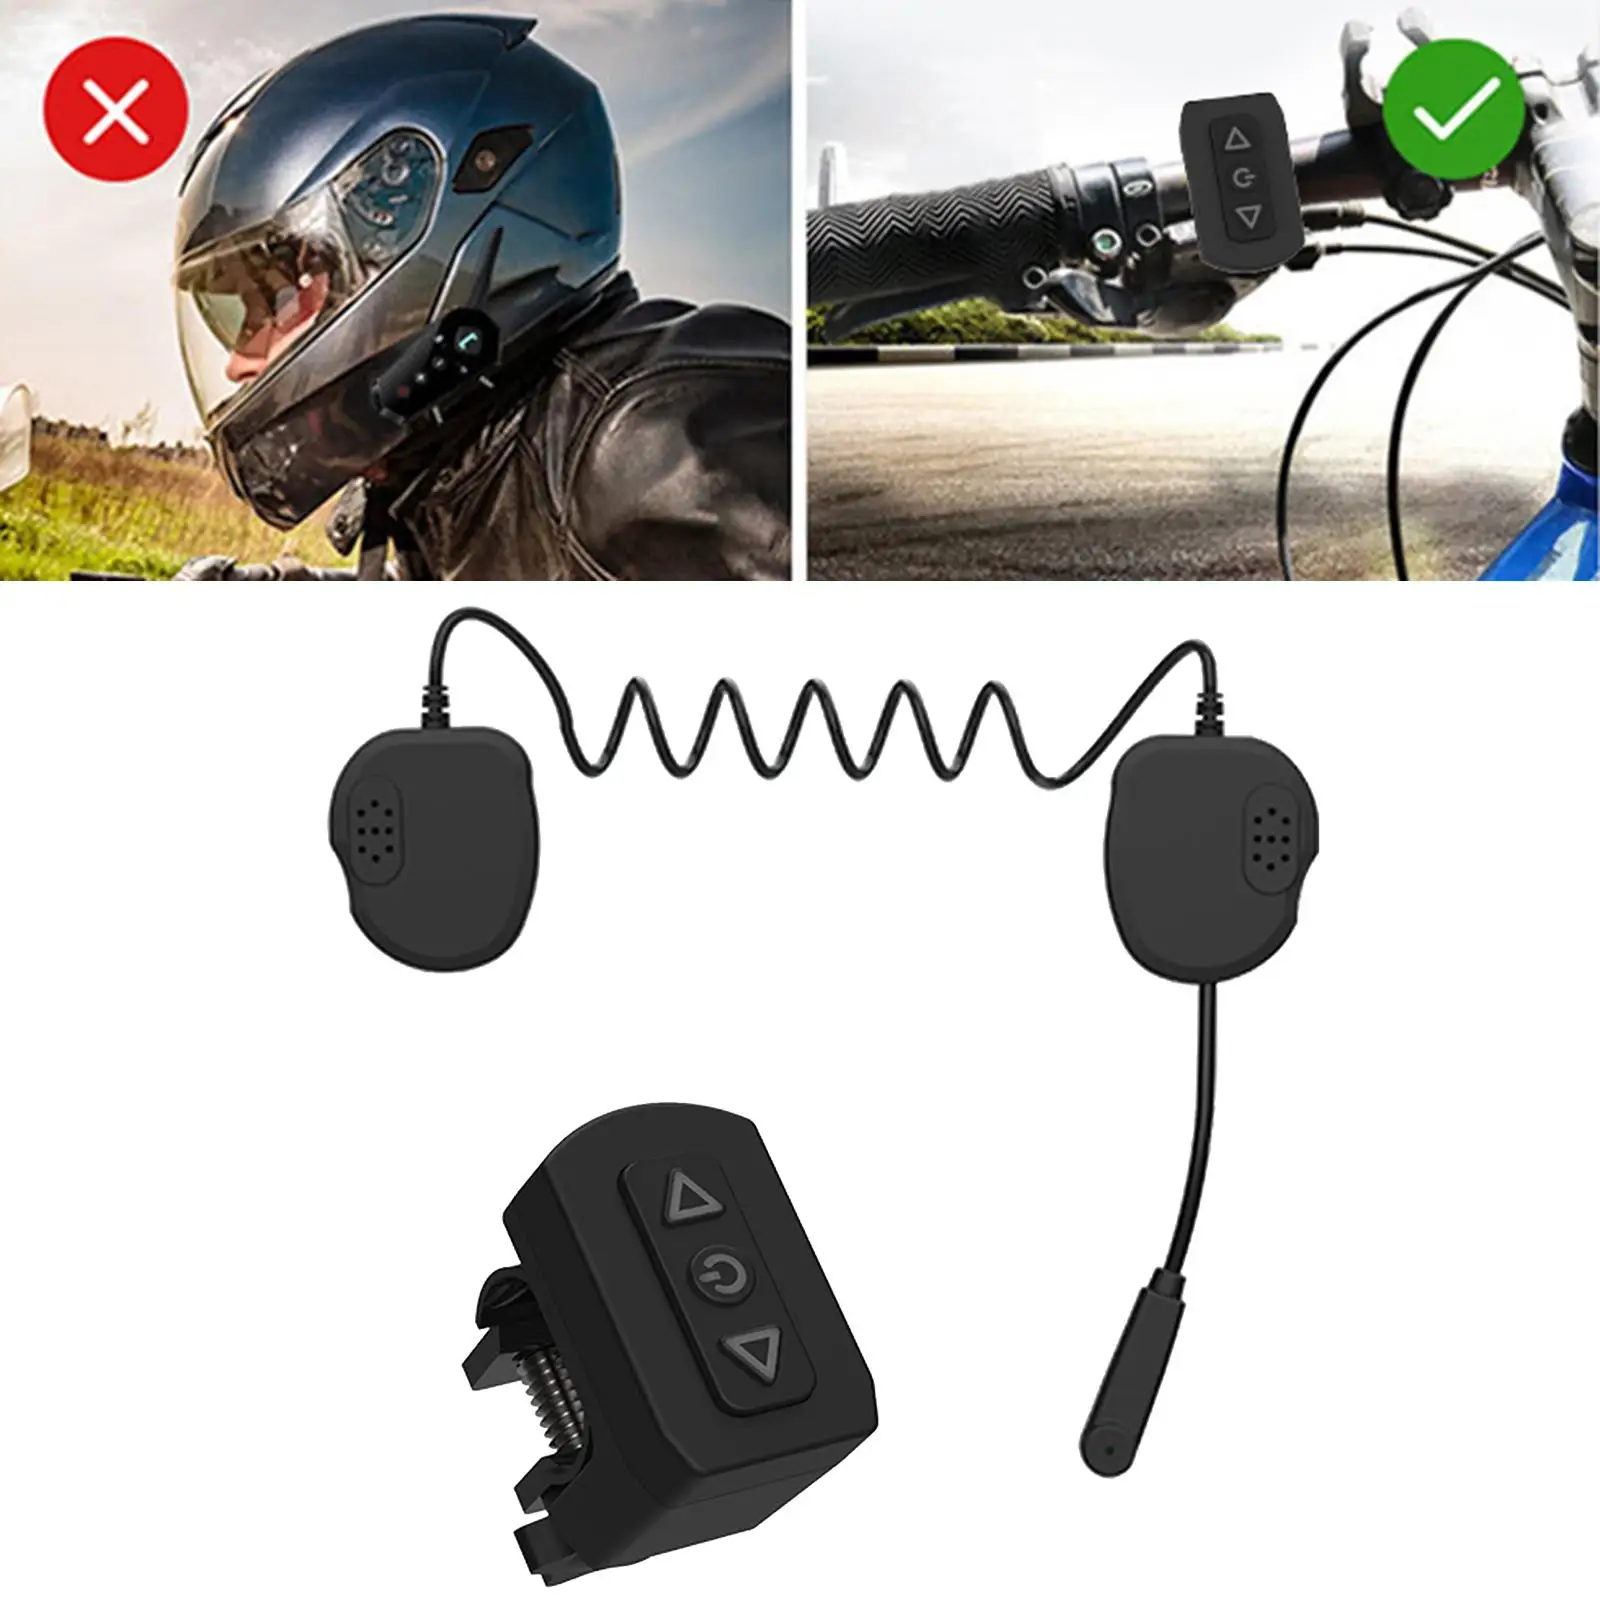 Motorcycle Helmet Bluetooth Headset Earphone Convenient with Microphone Quality Sound for Mobile Phone MP3 Stereo Free Your Hand